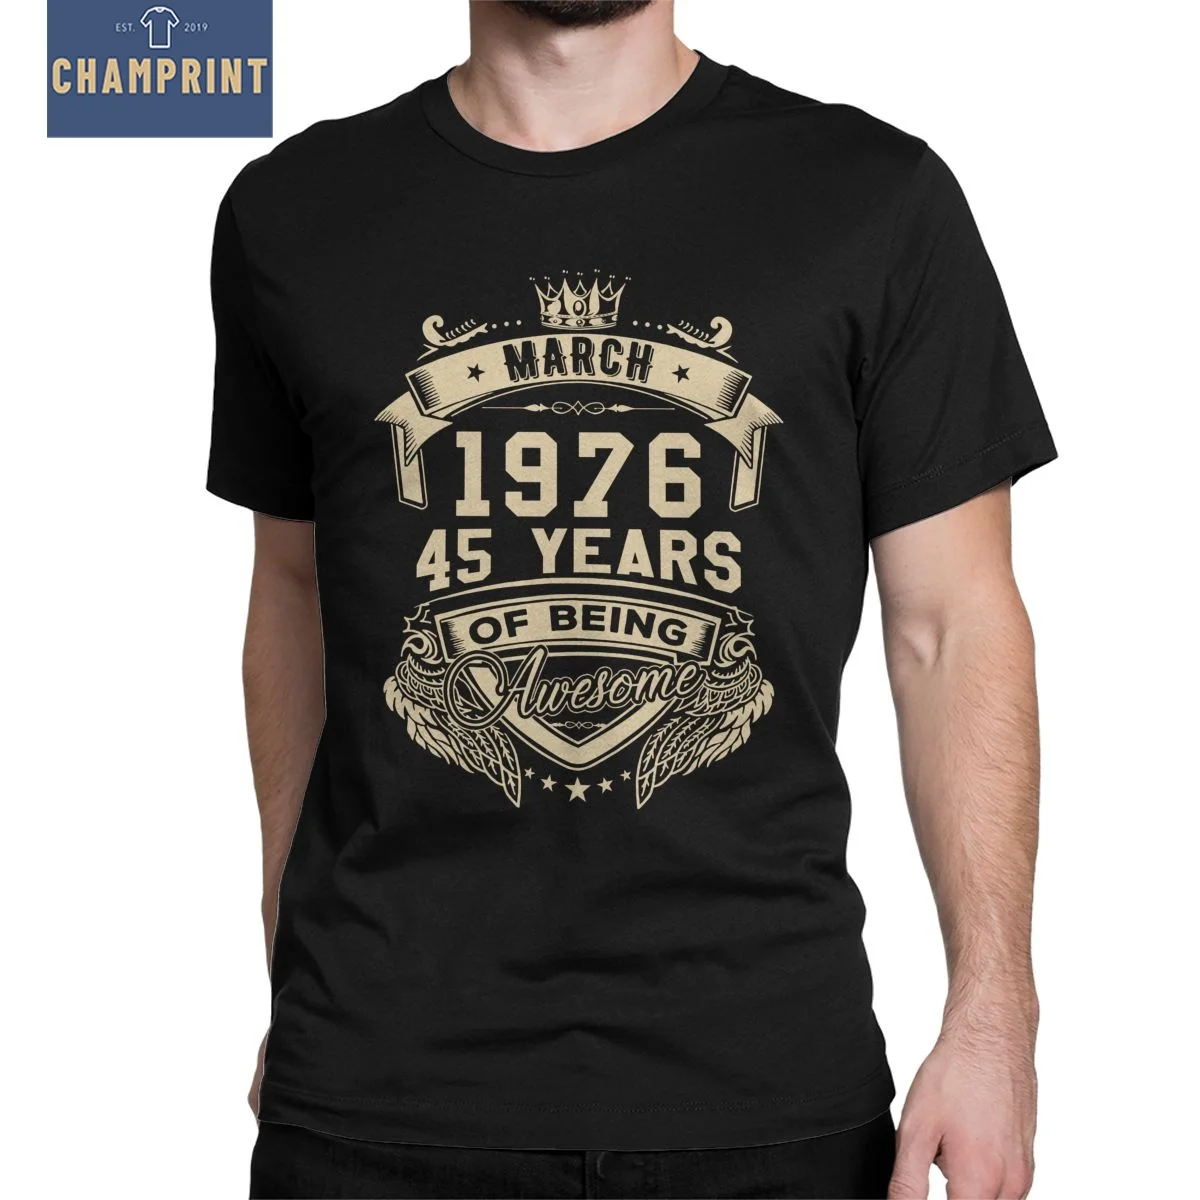 

Born In March 1976 45 Years Of Being Awesome Limited T-Shirts for Men 100% Cotton T Shirts 45th Birthday Tee Shirt Summer